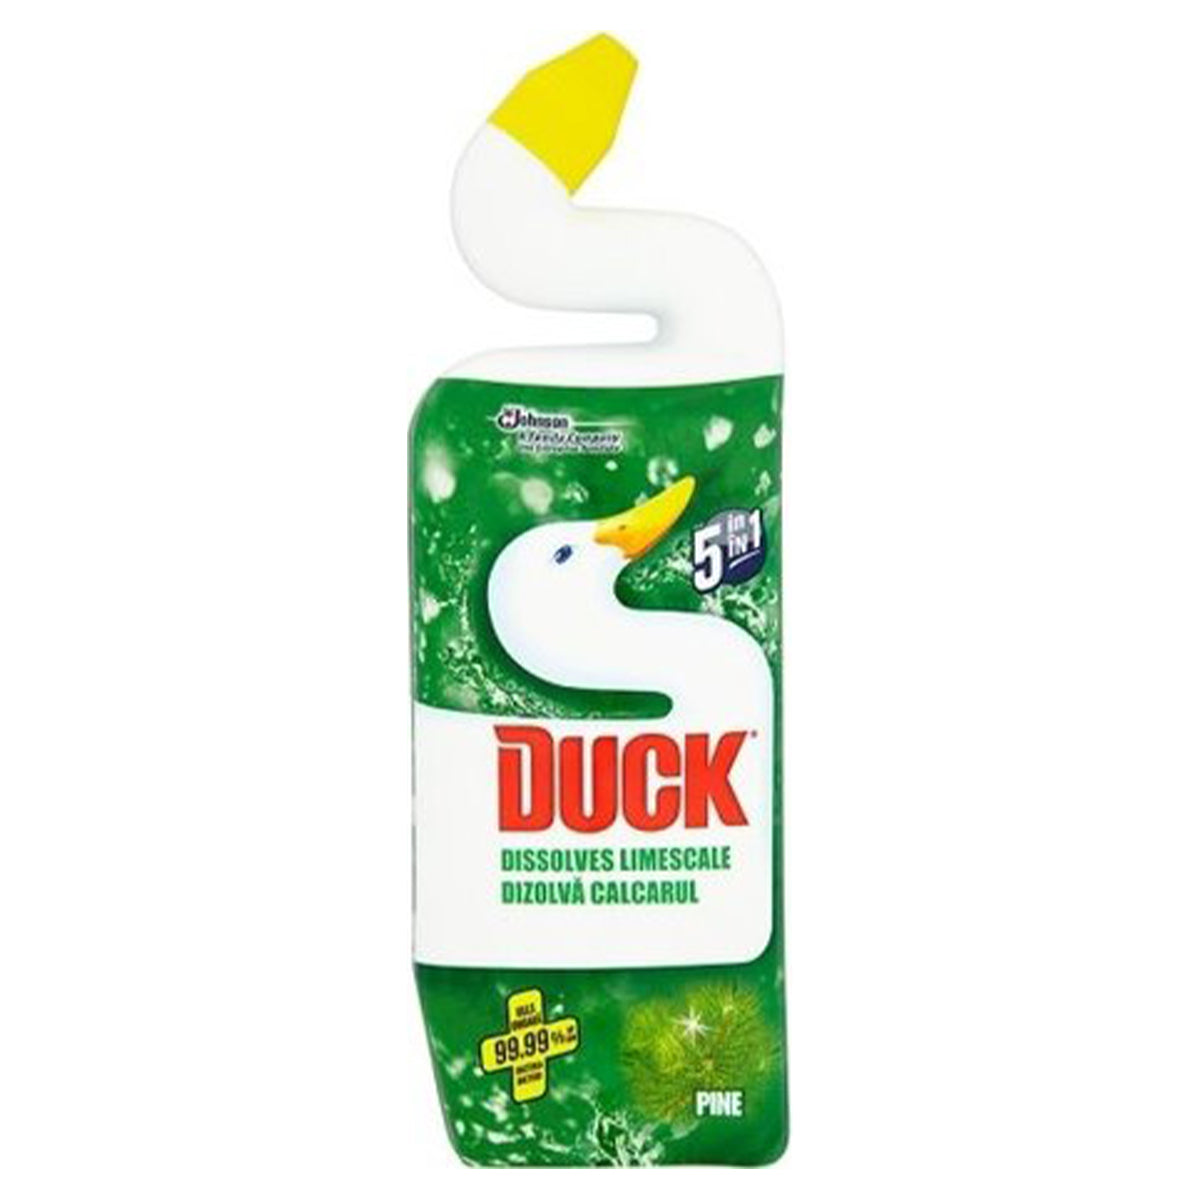 A bottle of Duck - 5 in 1 Dissolves Limescale Pine - 750ml dishwashing liquid on a white background.